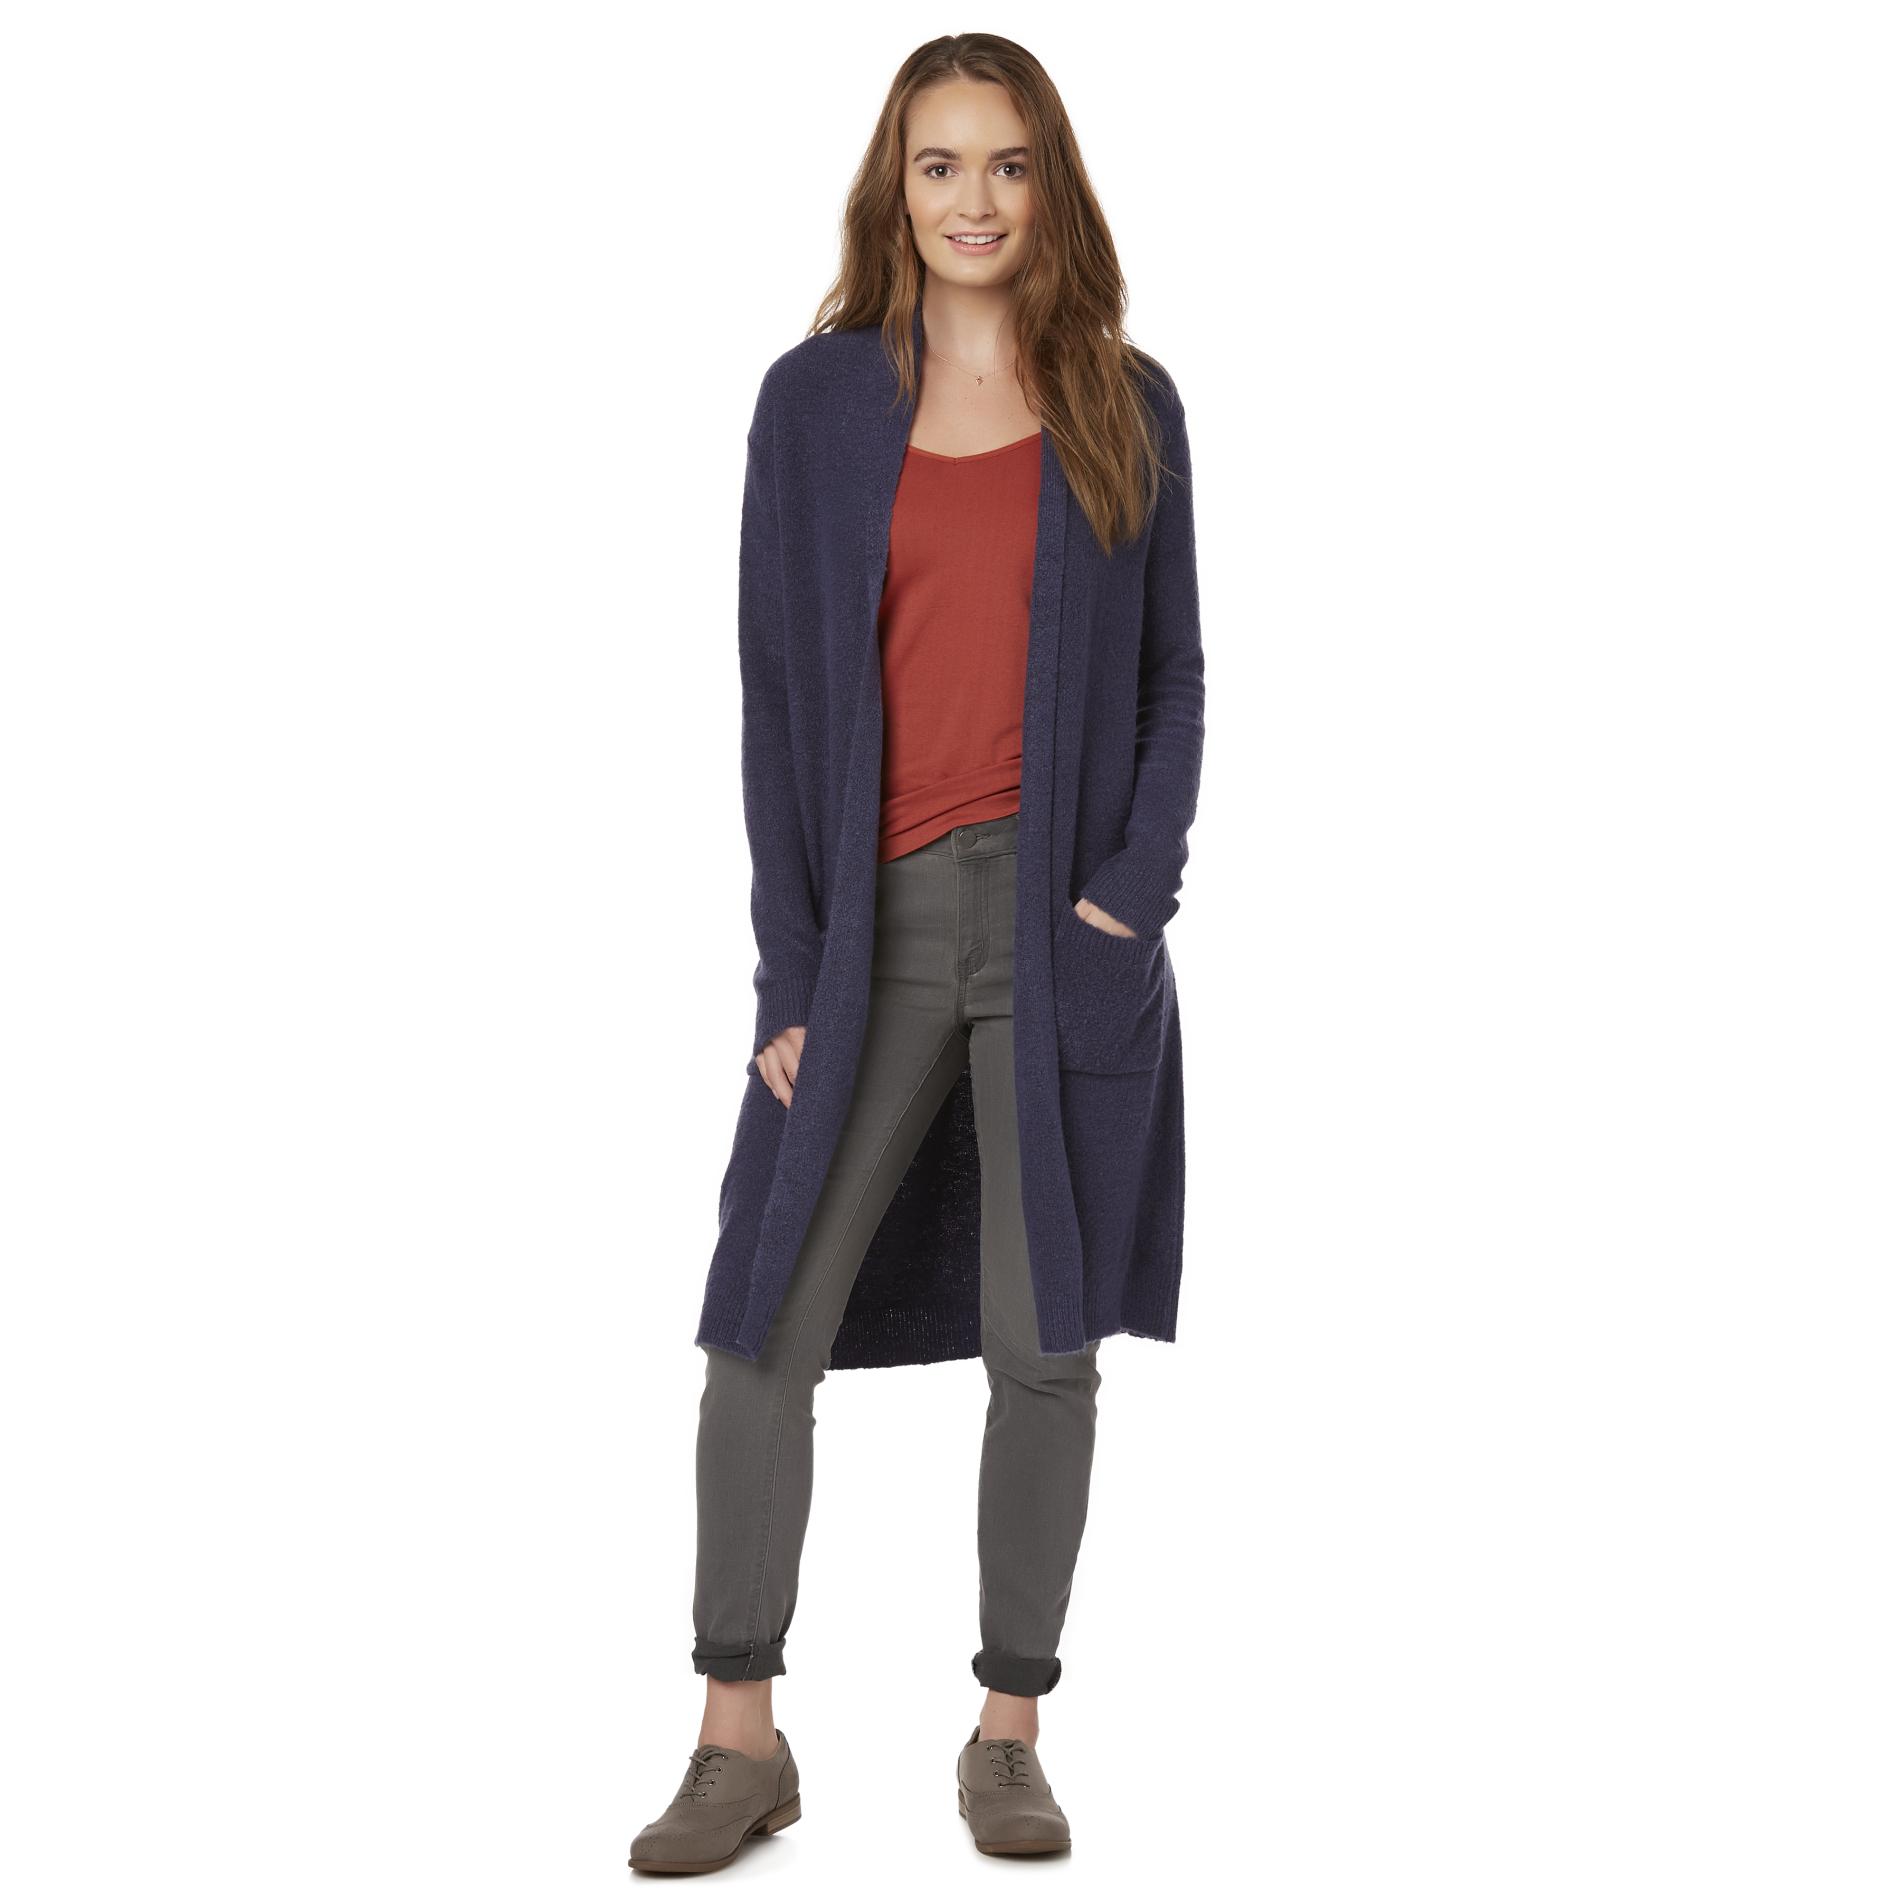 Simply Styled Women's Long Cardigan Sweater